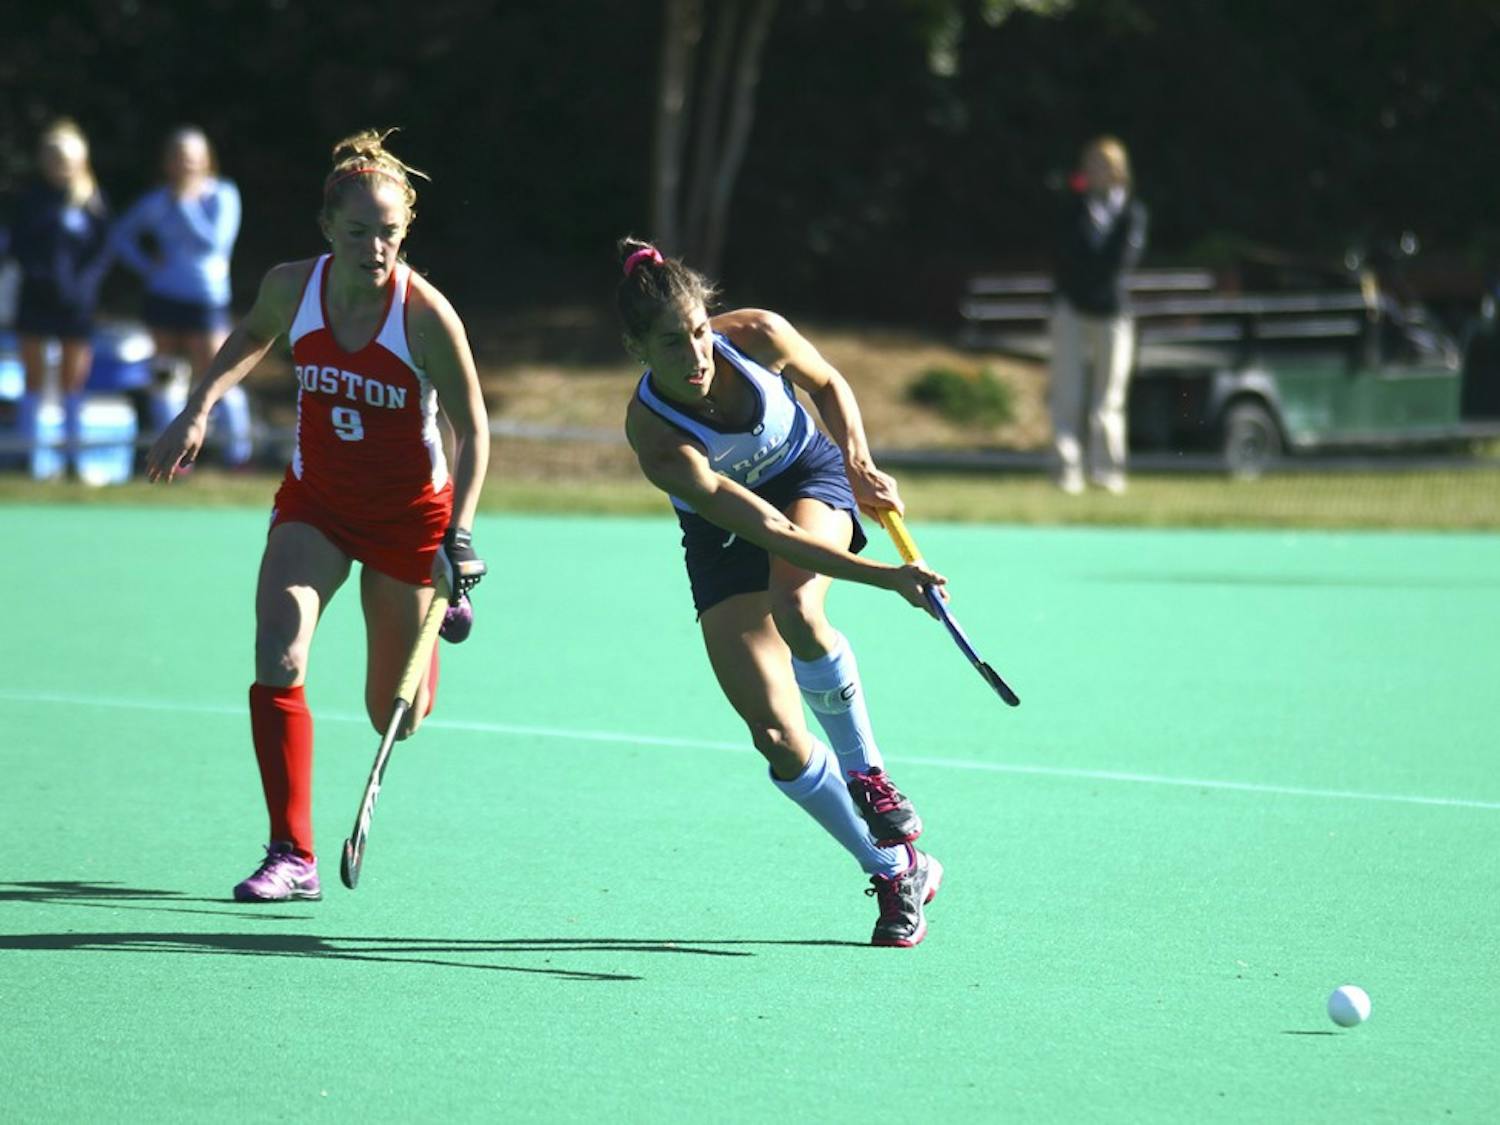 Wold, Emily passes the ball at the field hockey game against Boston University on Saturday Nov. 14 